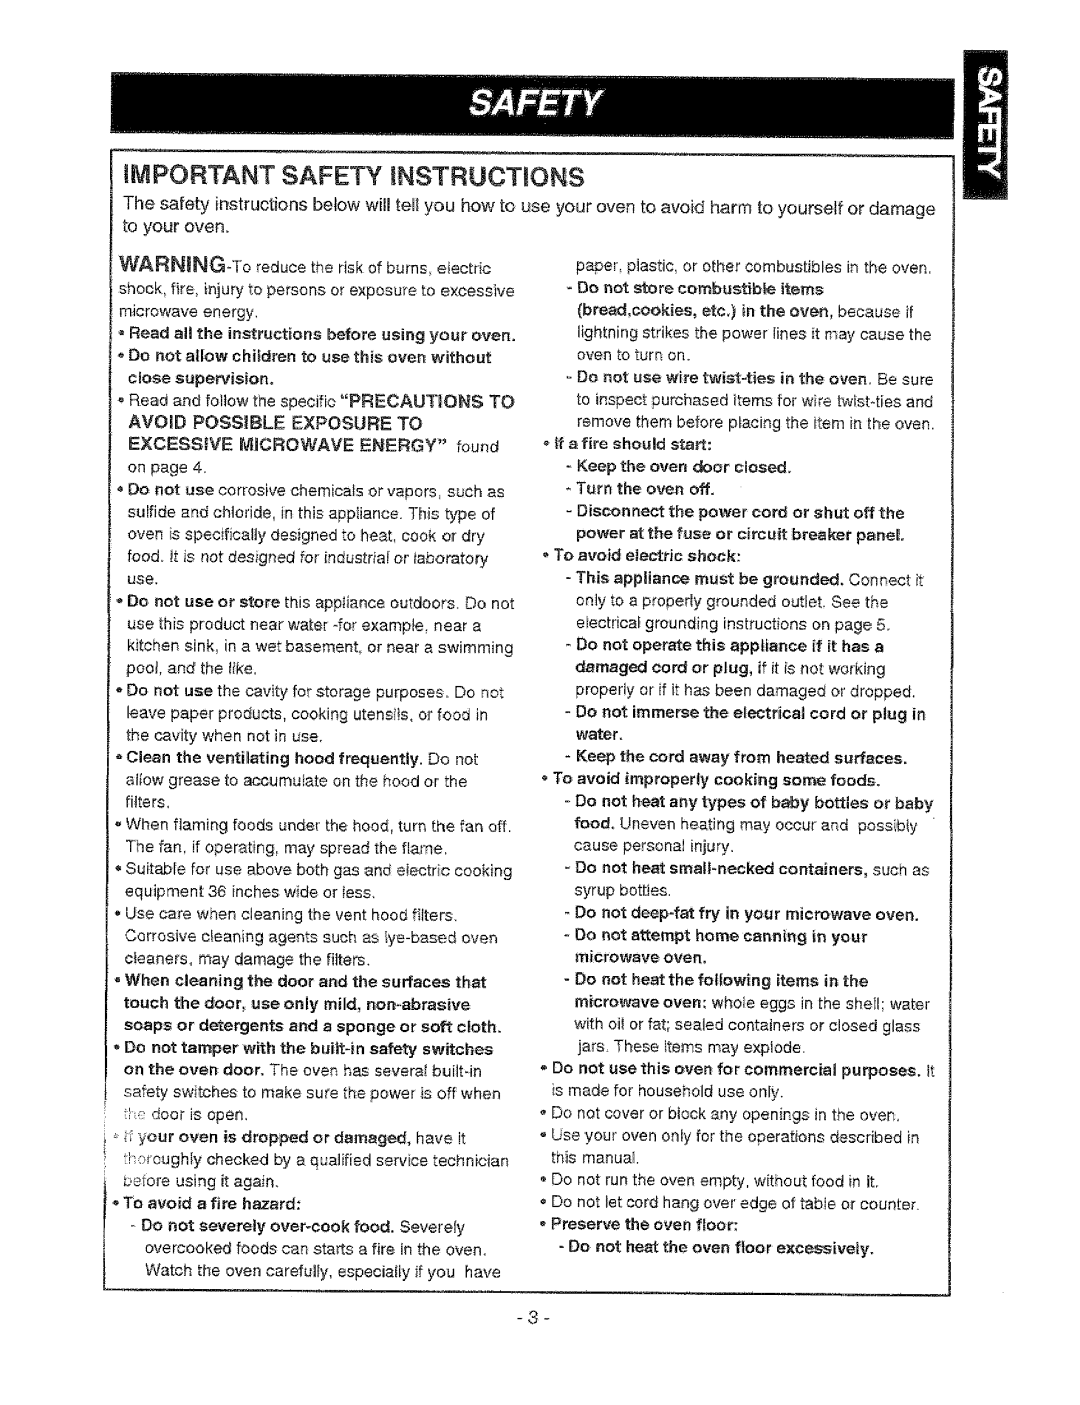 Sears 721.67601, 721.67602 owner manual iMPORTANT SAFETY INSTRUCTIONS, close supervision, Do not store combustible items 